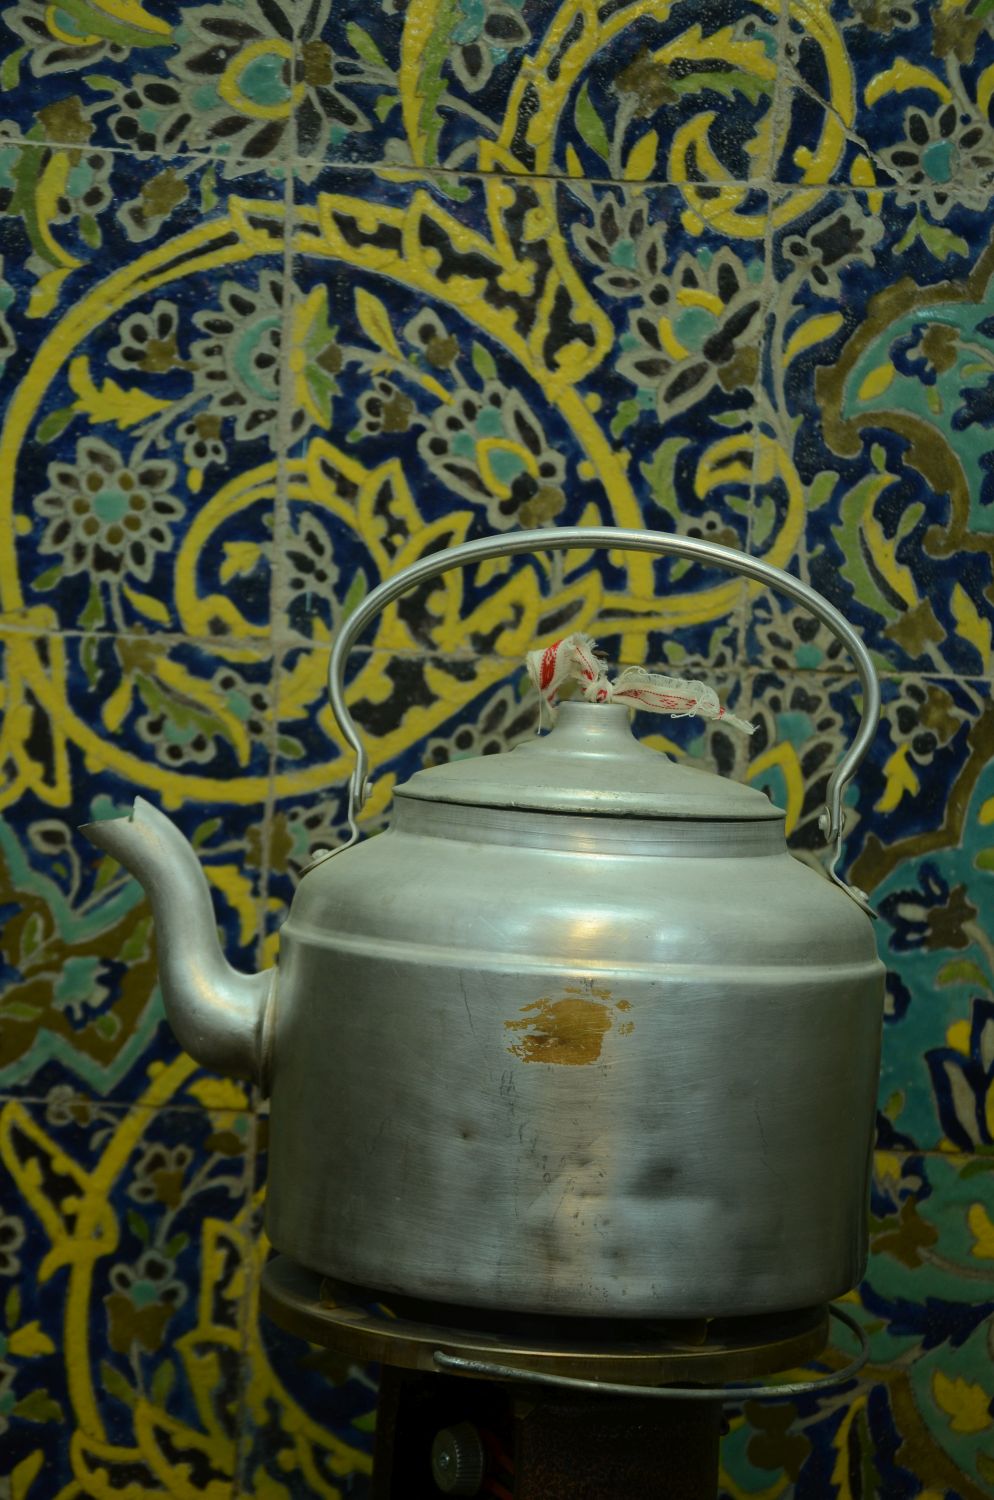 Kettle in the synagogue kitchen.